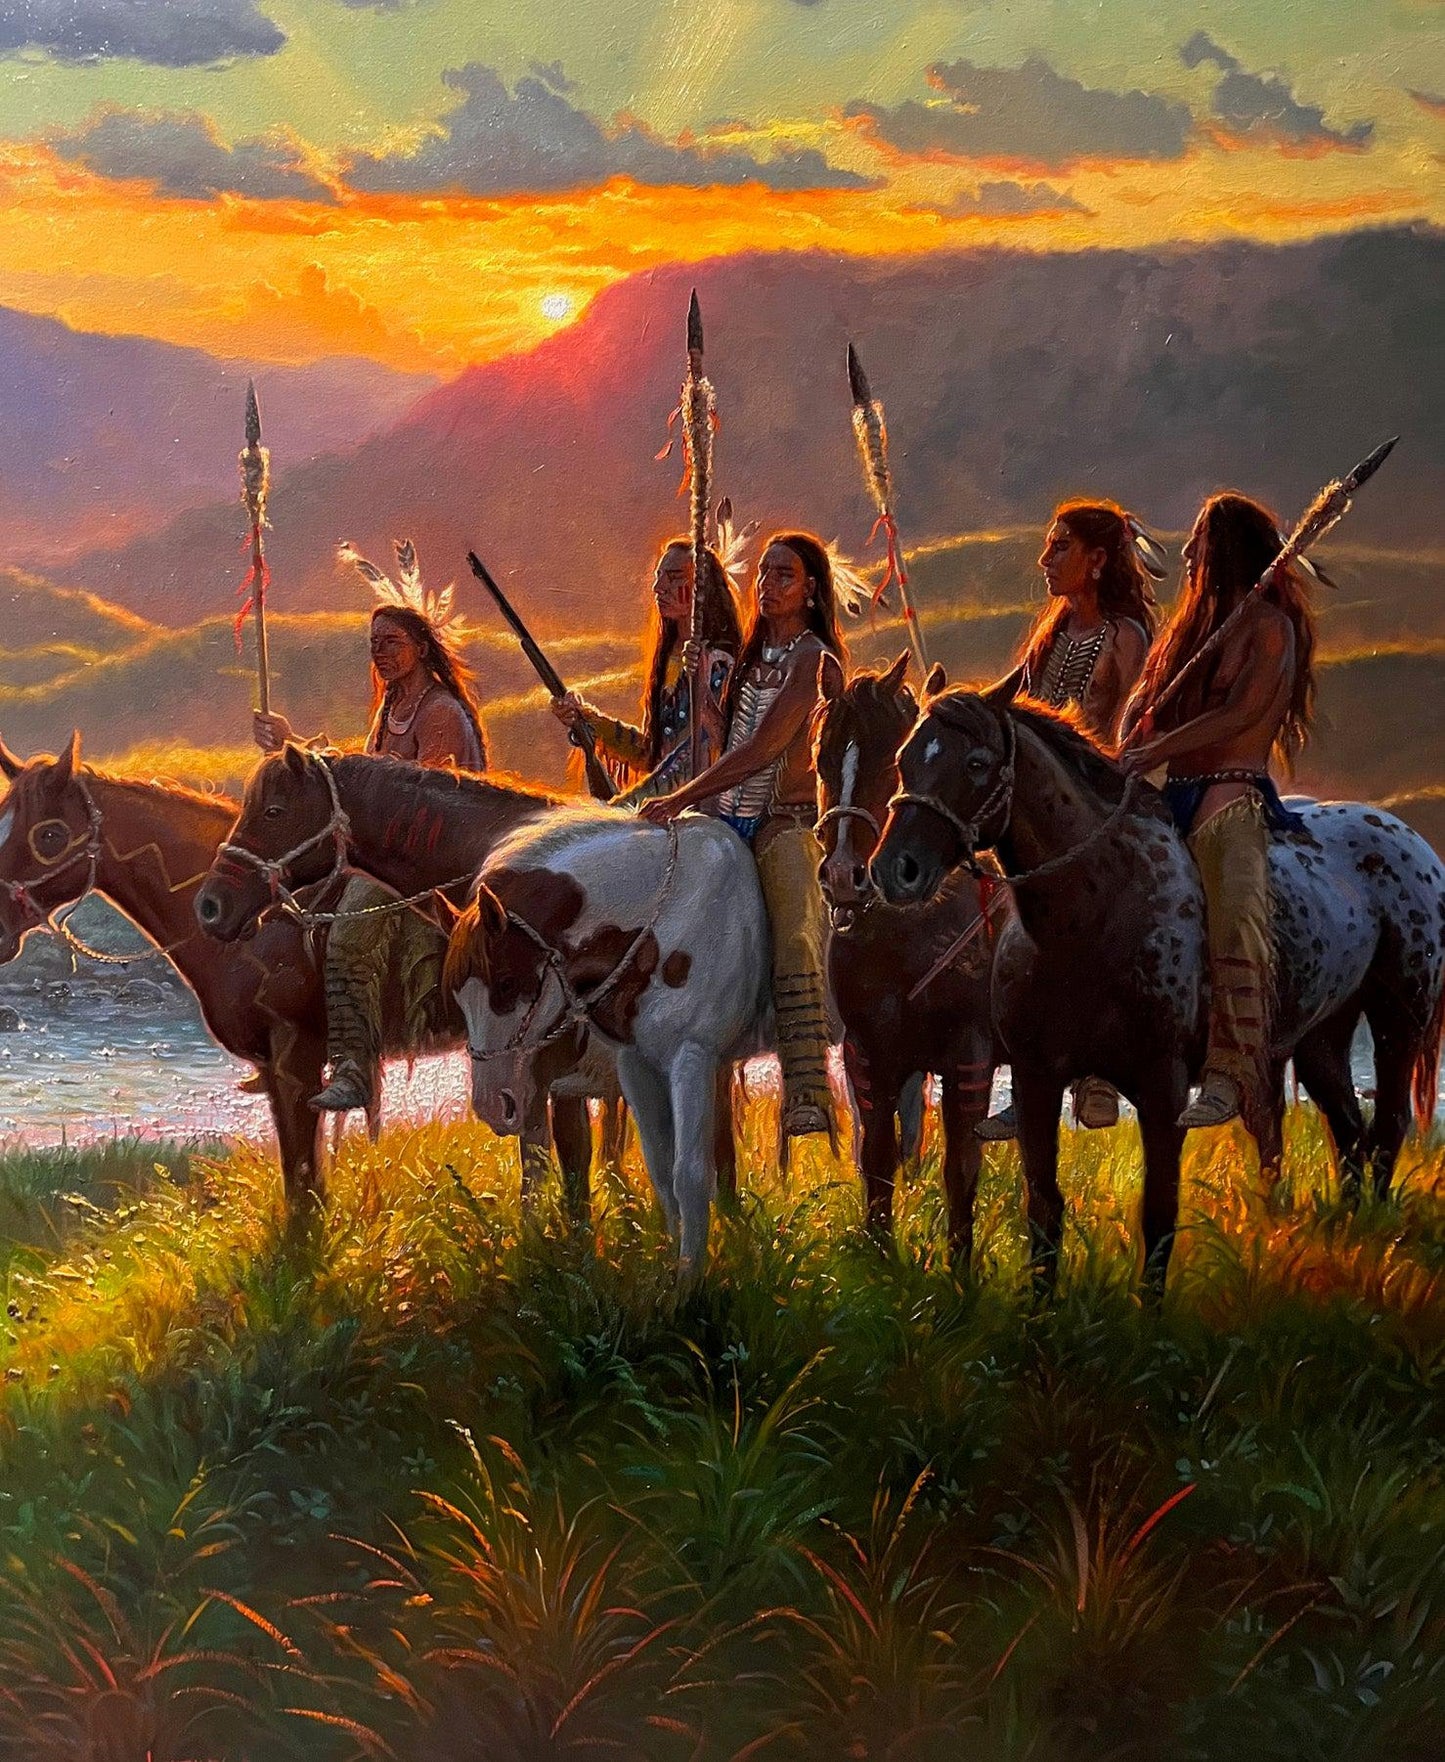 Make a Stand-Painting-Mark Keathley-Sorrel Sky Gallery